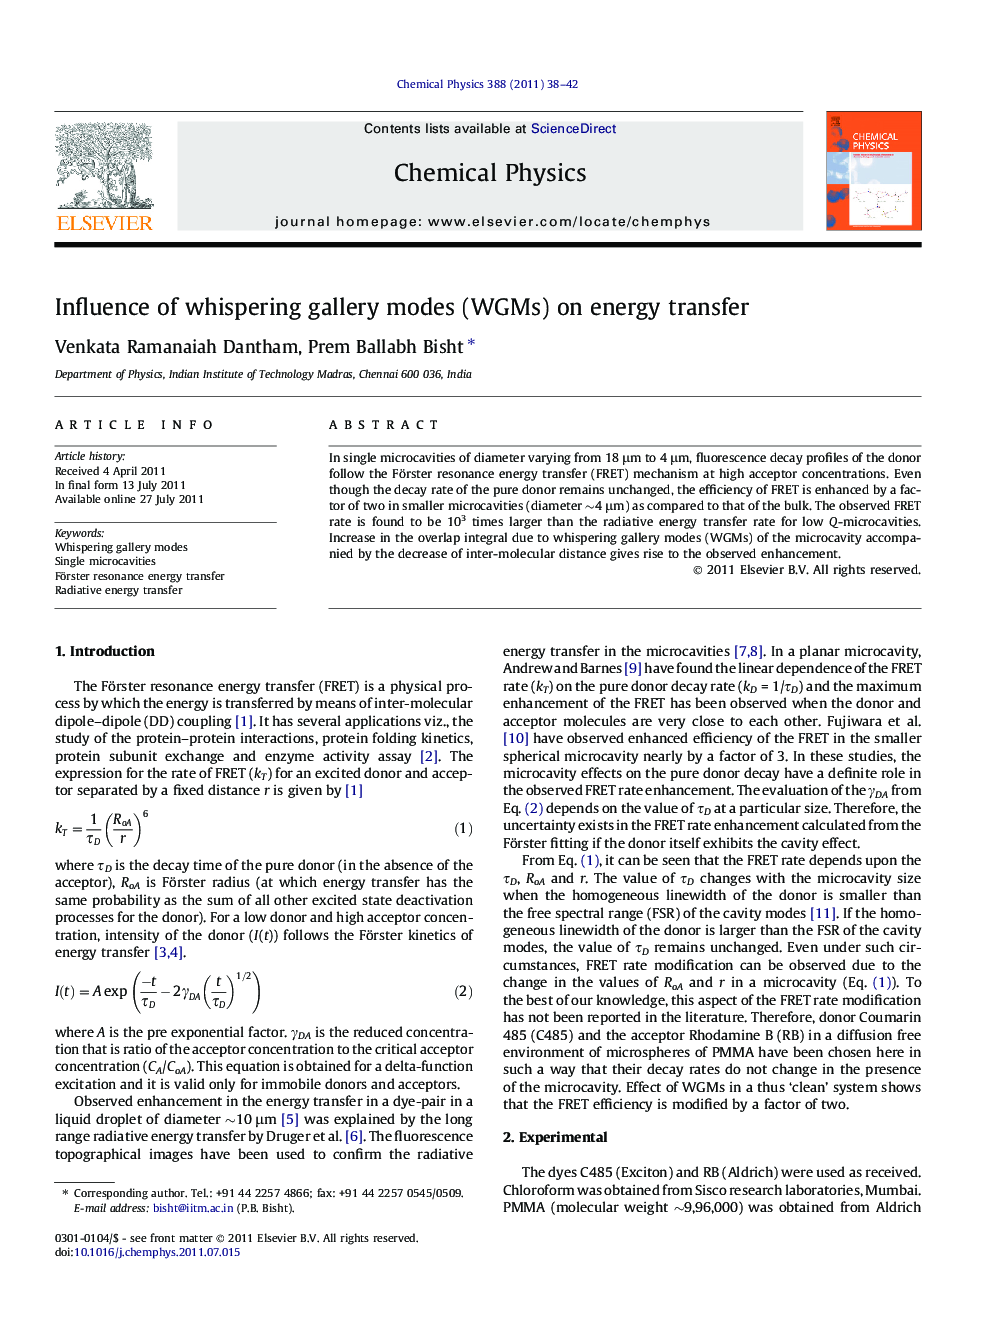 Influence of whispering gallery modes (WGMs) on energy transfer